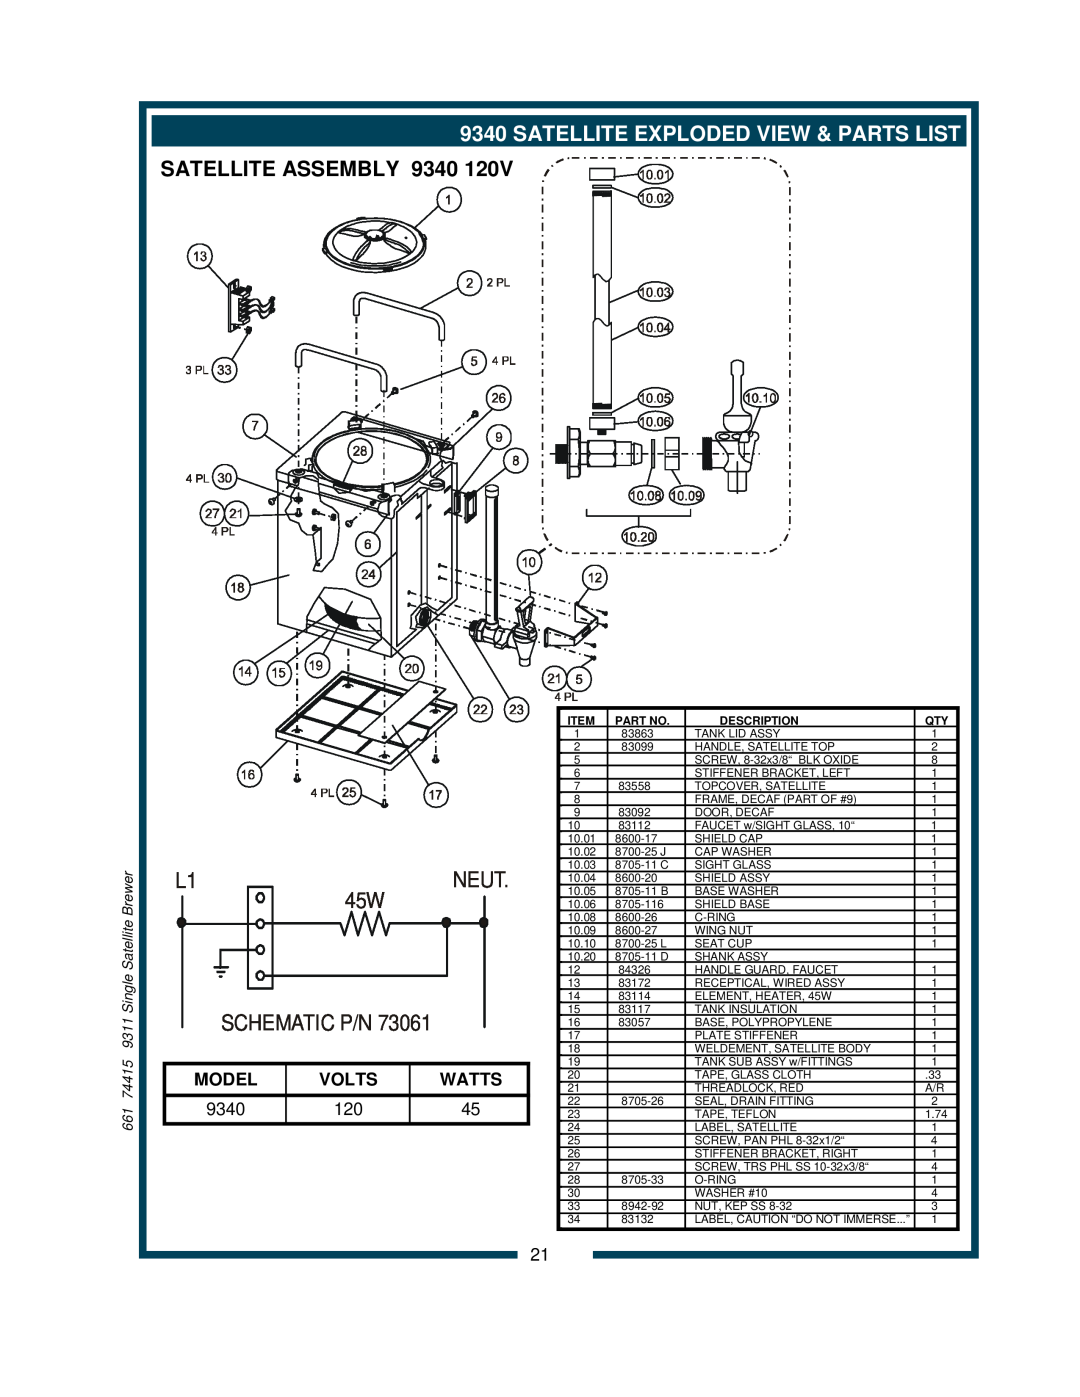 Bloomfield 9311 Satellite Exploded View & Parts List, Satellite Assembly, L1NEUT 45W SCHEMATIC P/N, Model, Volts, Watts 